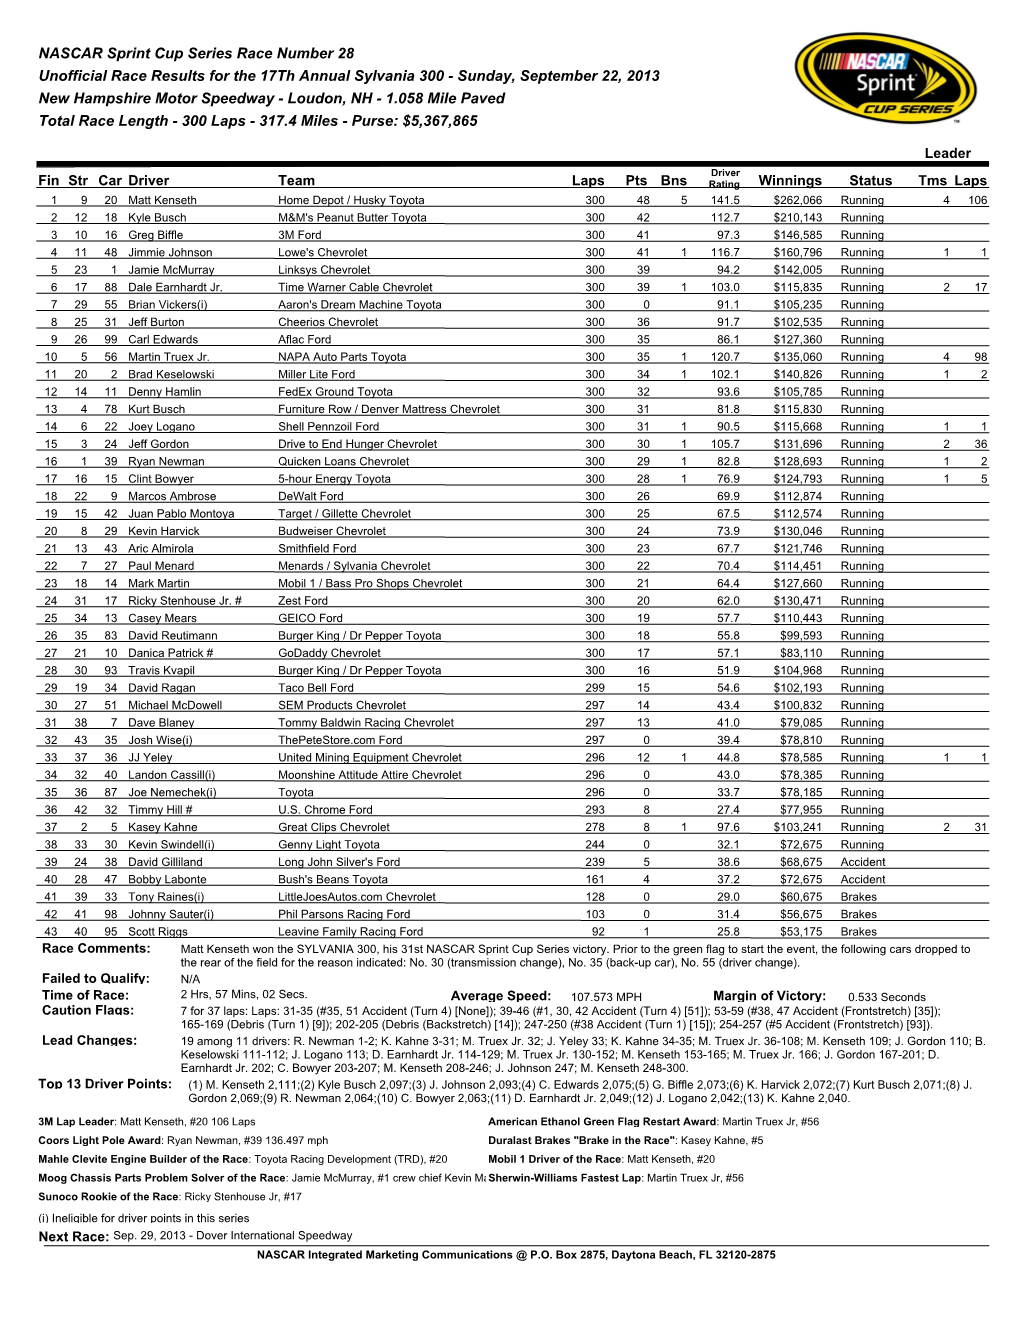 Sylvania 300 - Sunday, September 22, 2013 New Hampshire Motor Speedway - Loudon, NH - 1.058 Mile Paved Total Race Length - 300 Laps - 317.4 Miles - Purse: $5,367,865